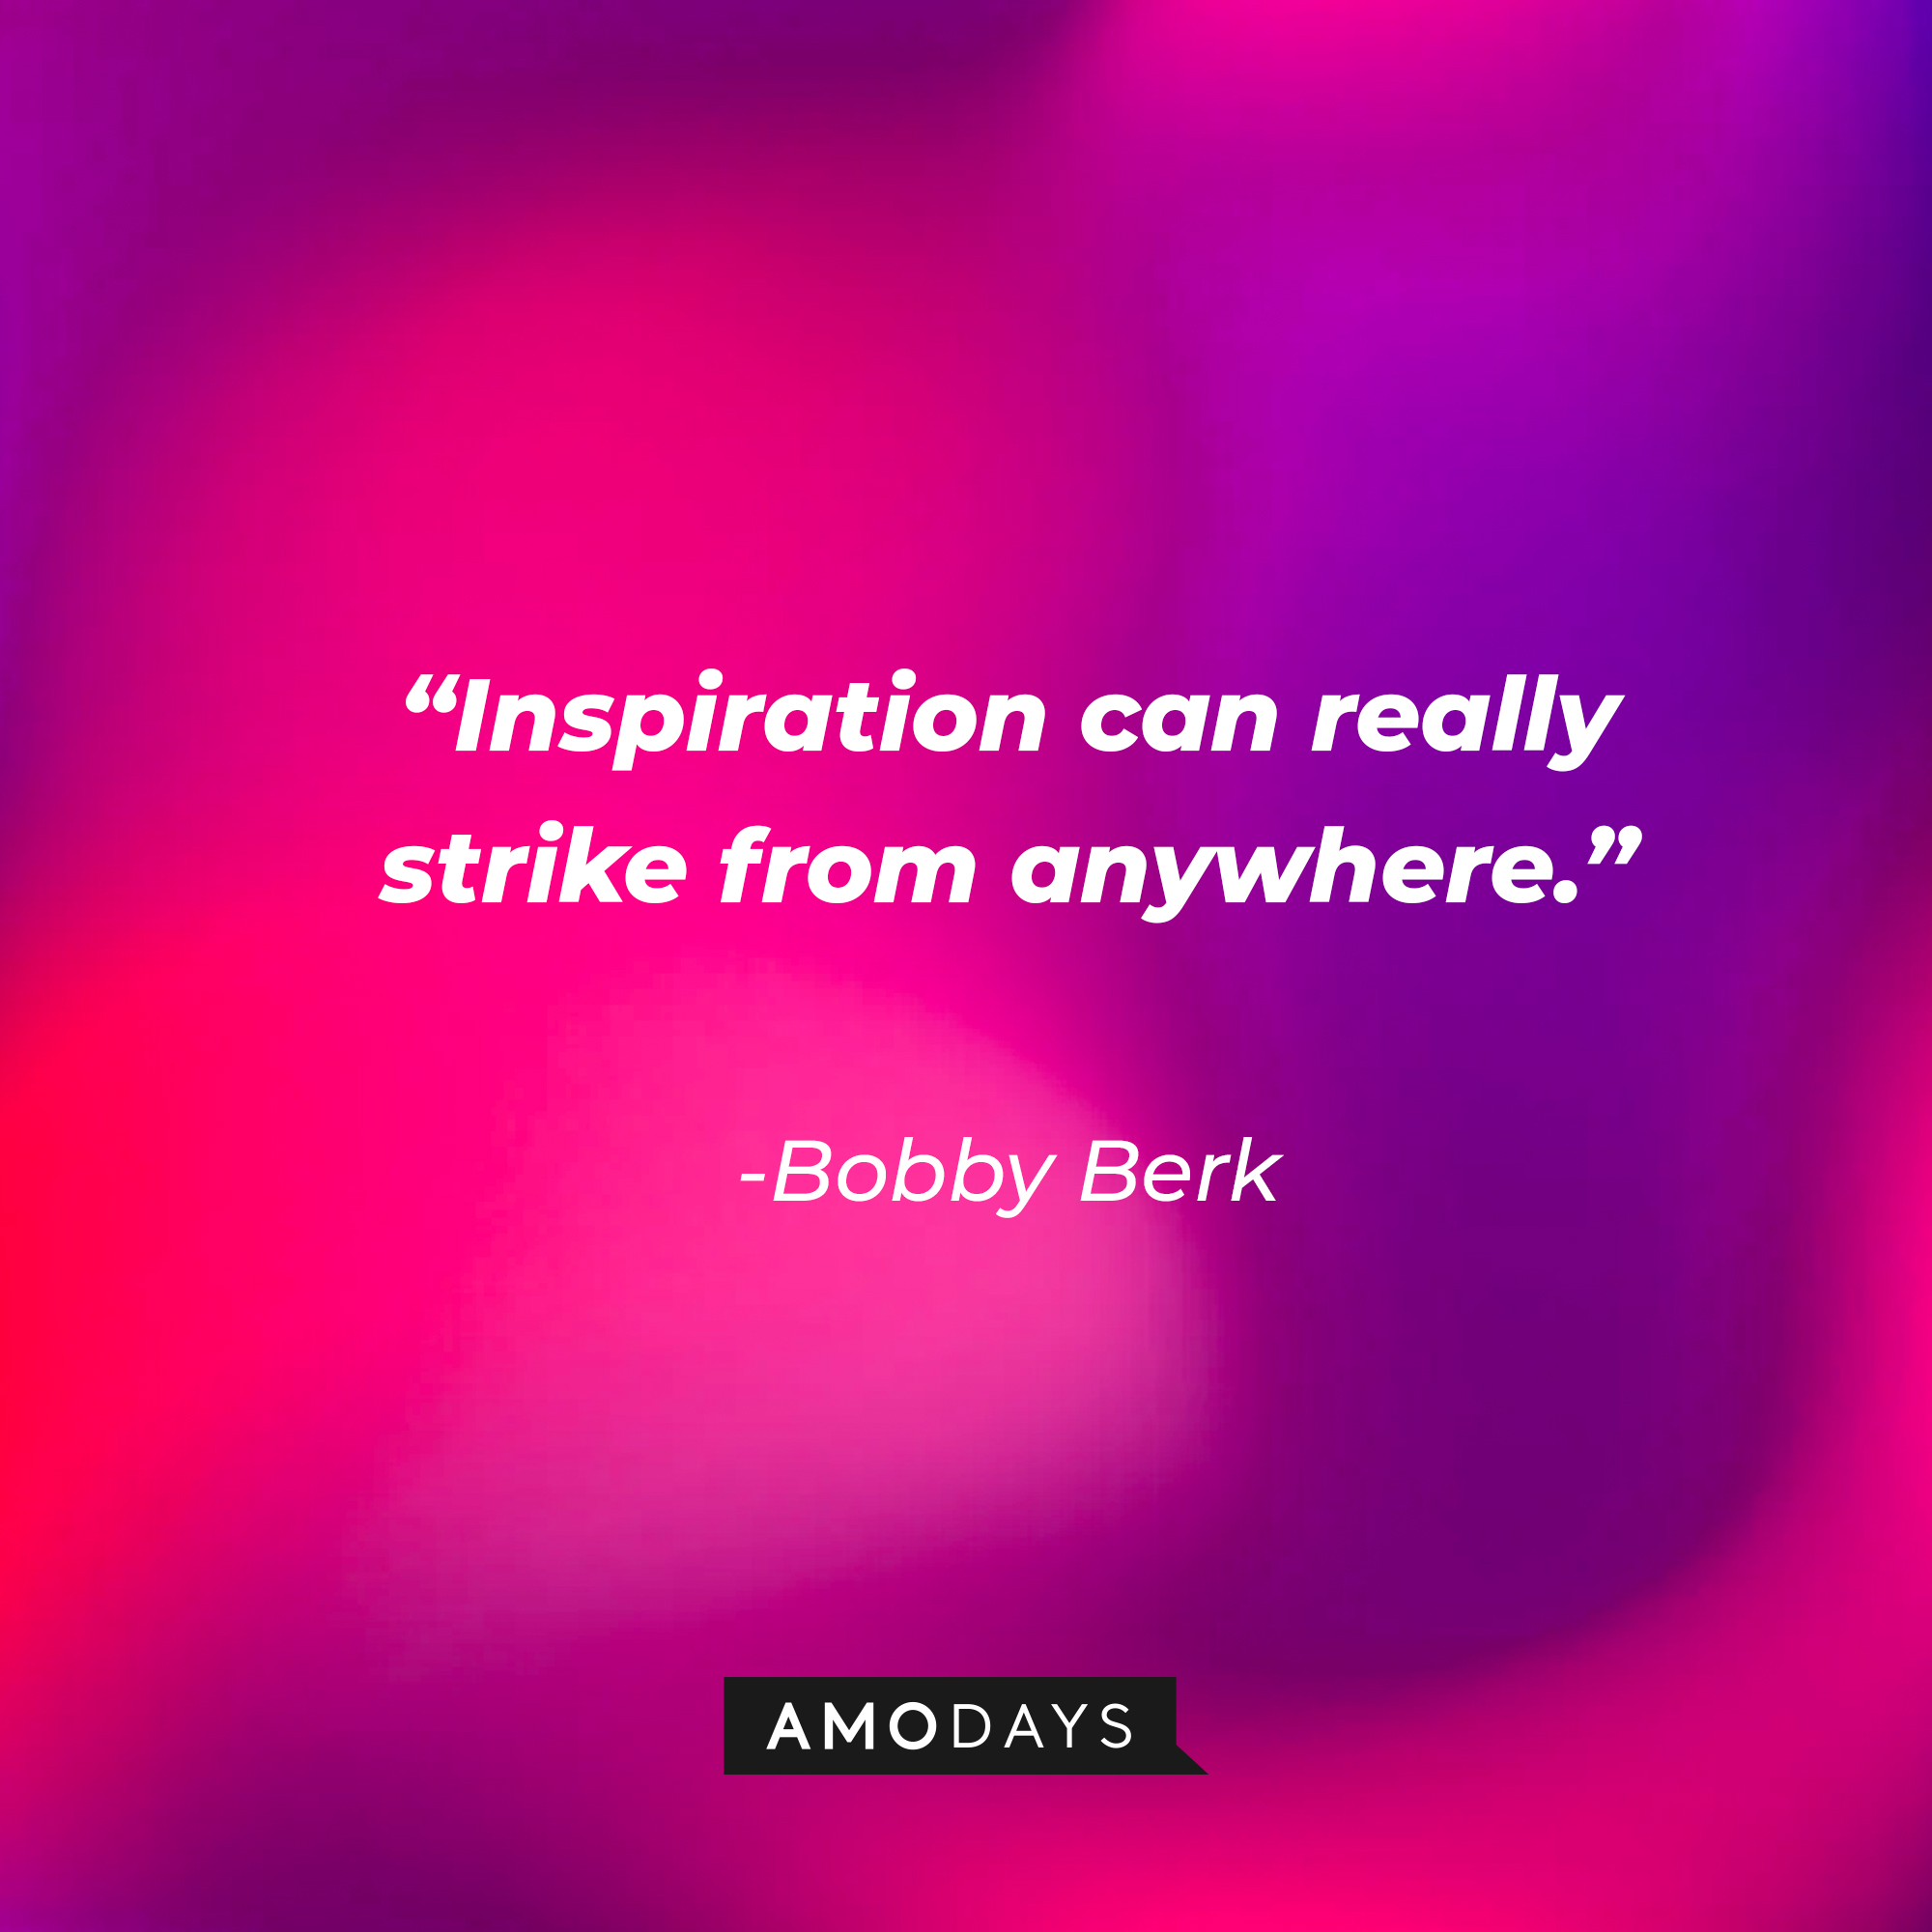 Bobby Berk's quote: Inspiration can really strike from anywhere." | Source: Getty Images